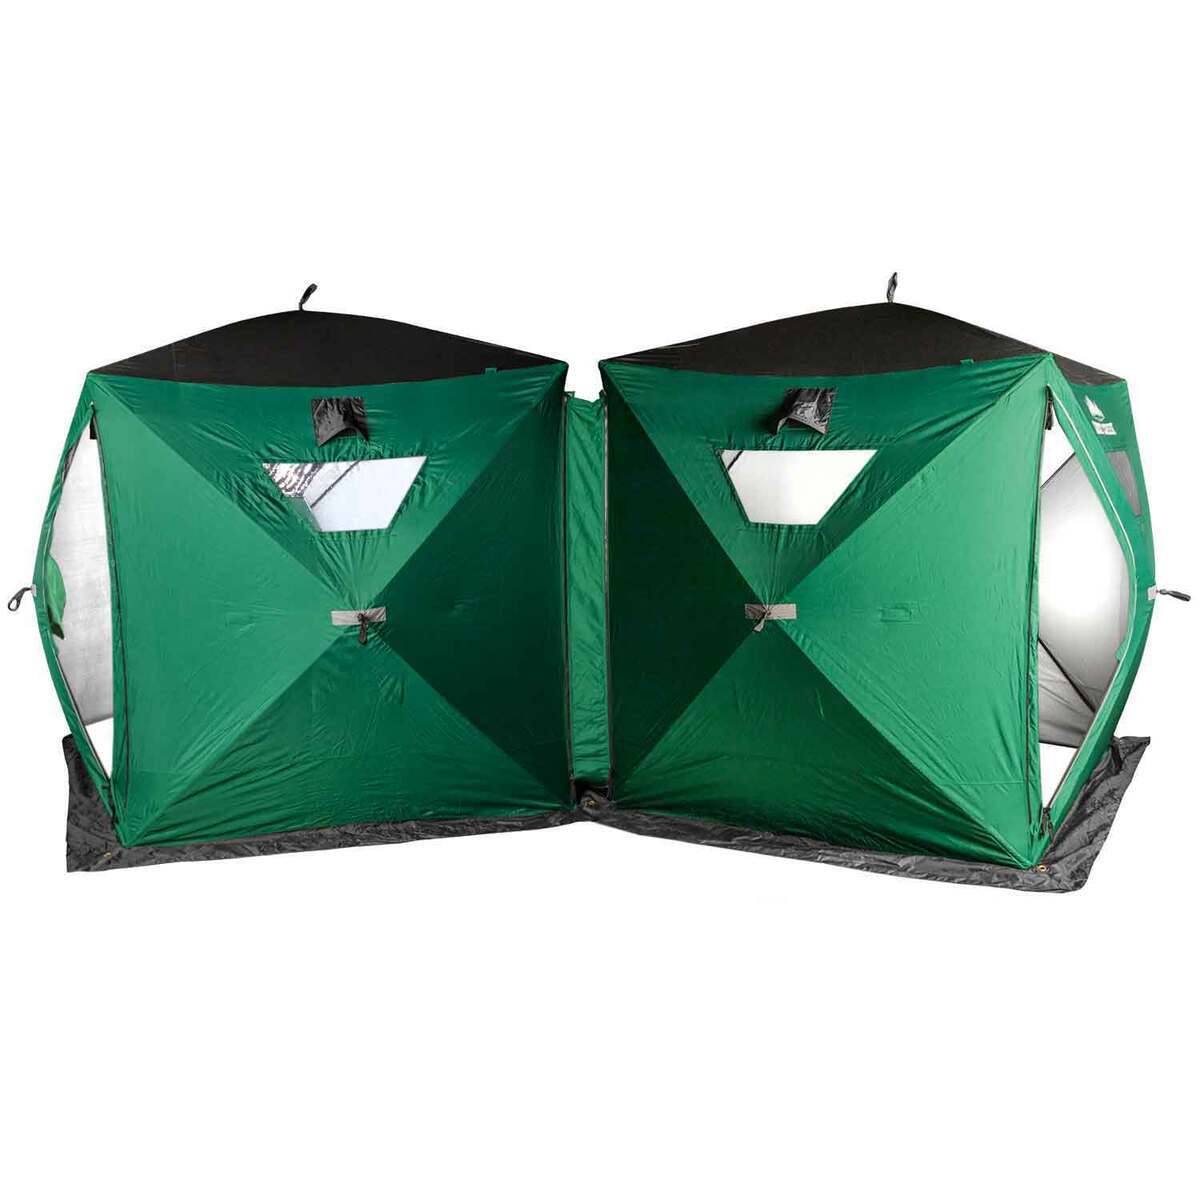 Lost Creek Party Tent Kit Ice Fishing Shelter - Green/Black by Sportsman's Warehouse